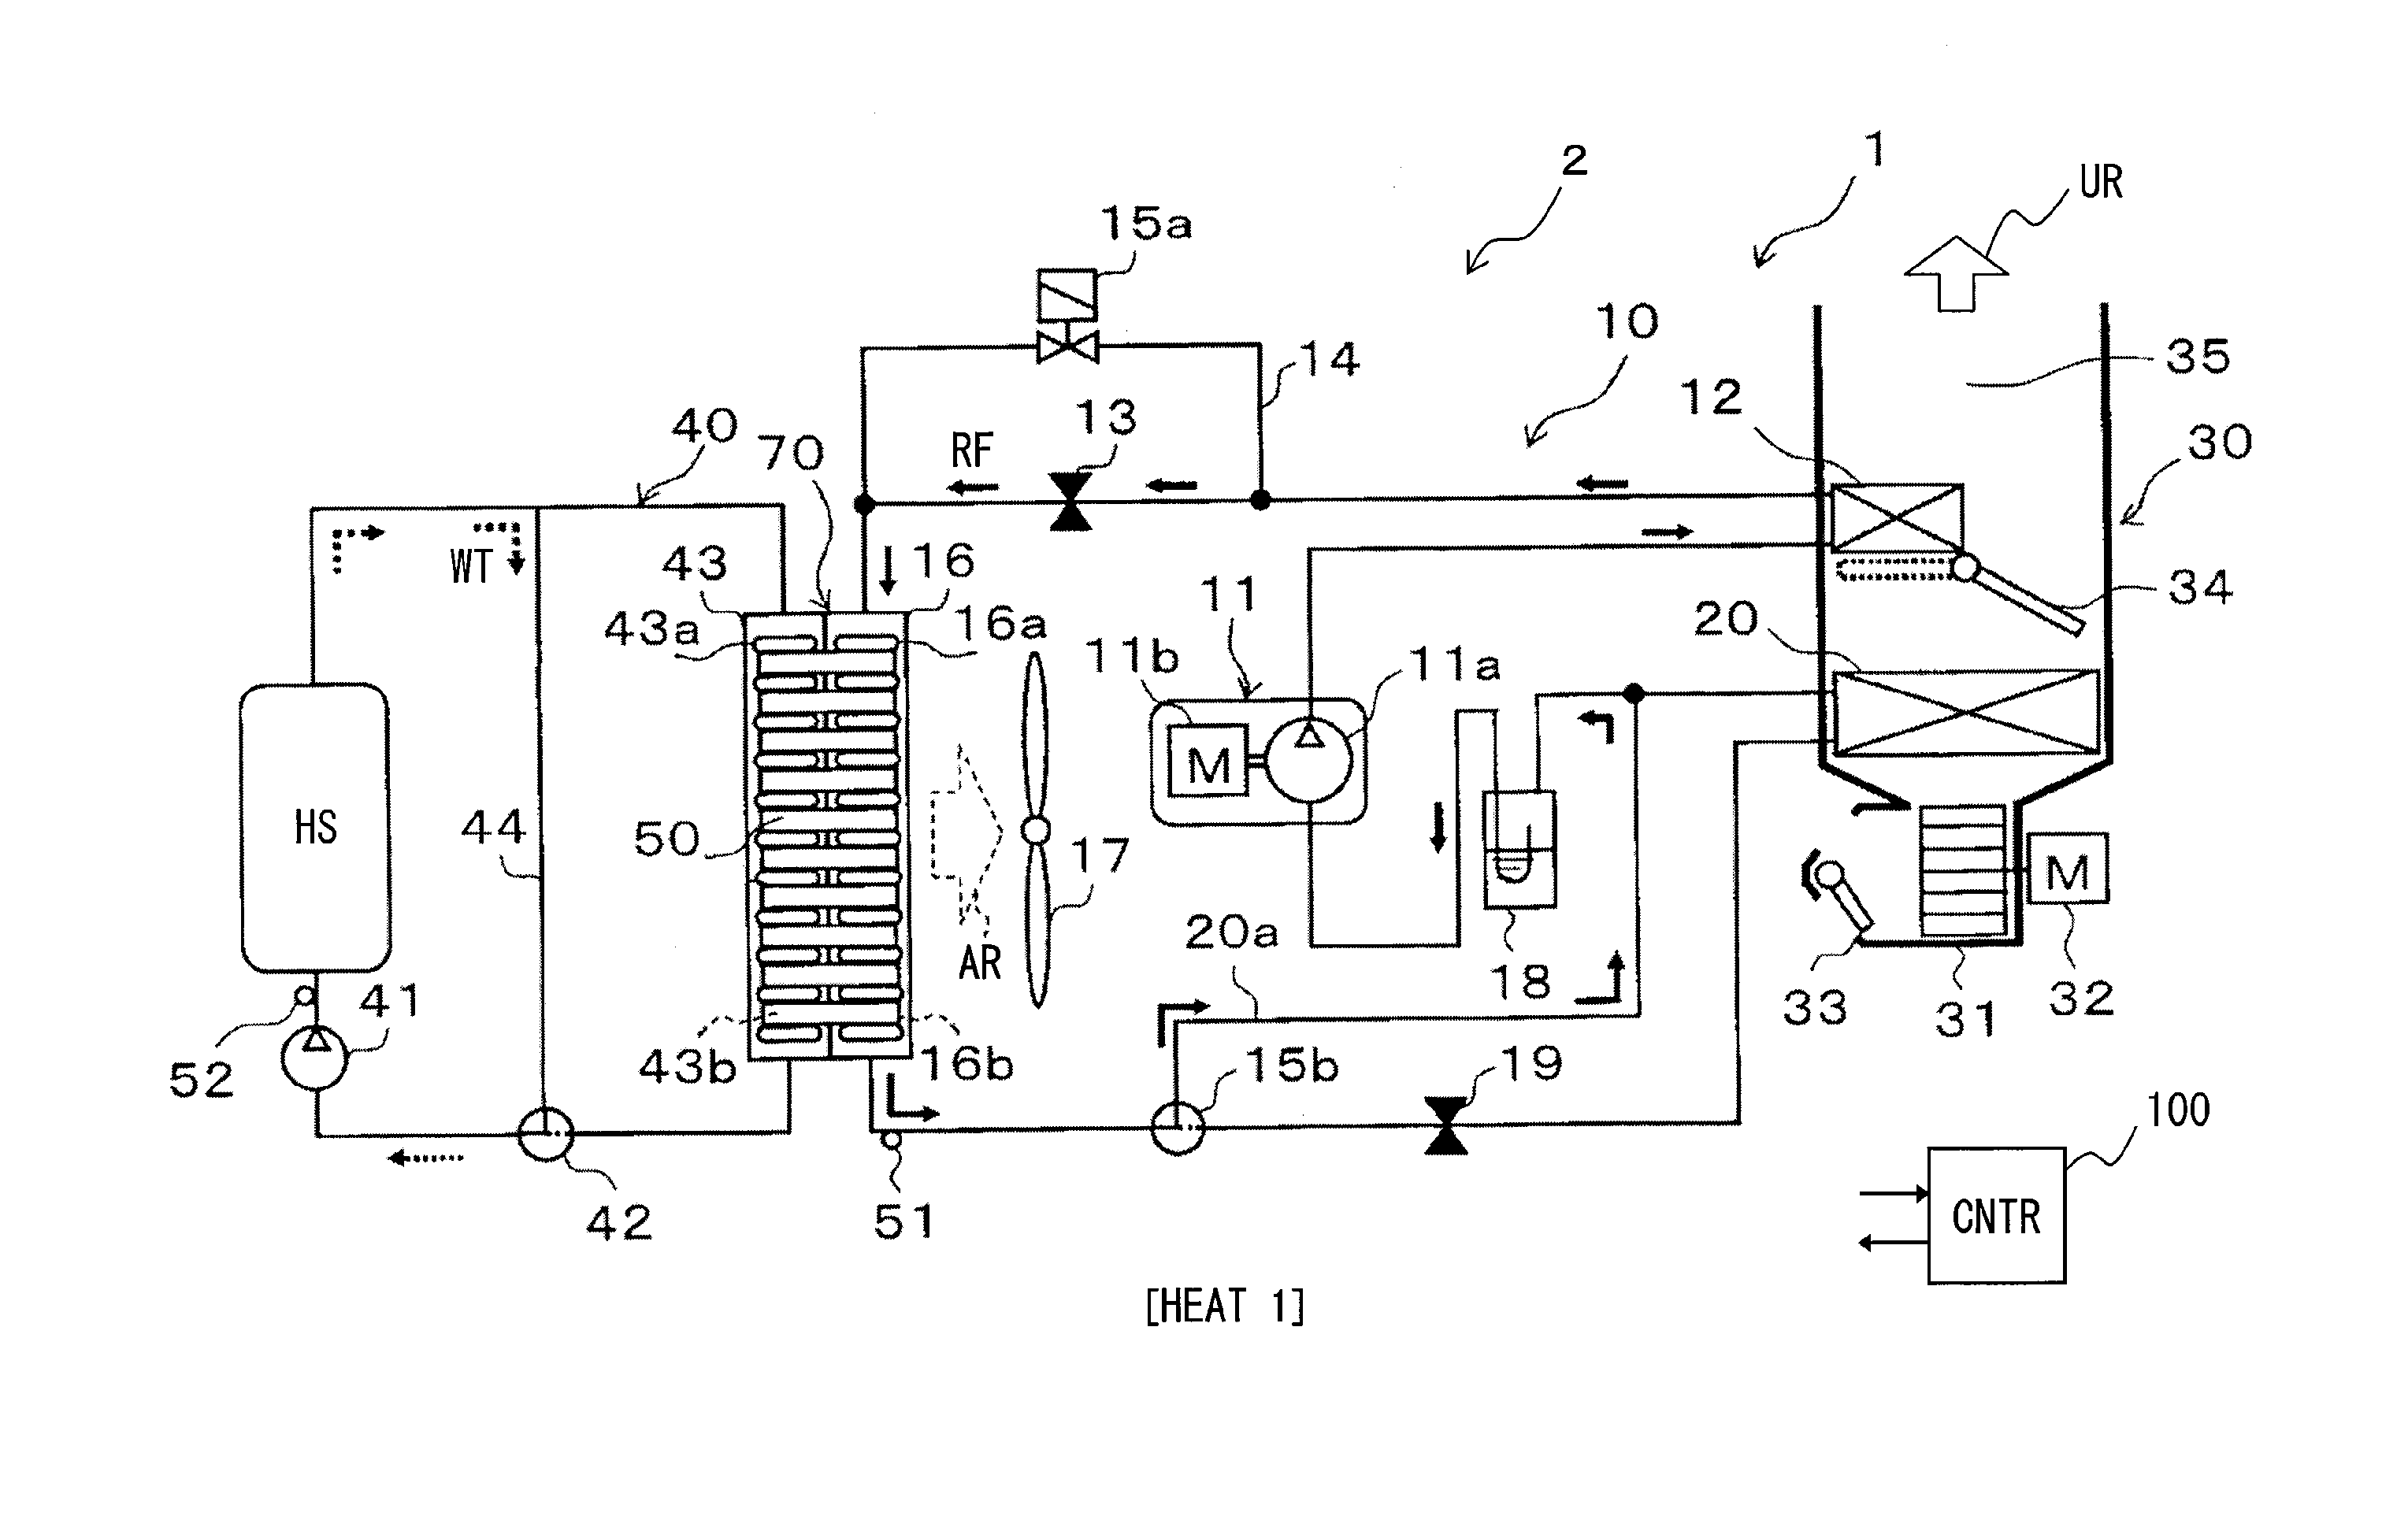 Heat exchanger and heat pump cycle provided with the same